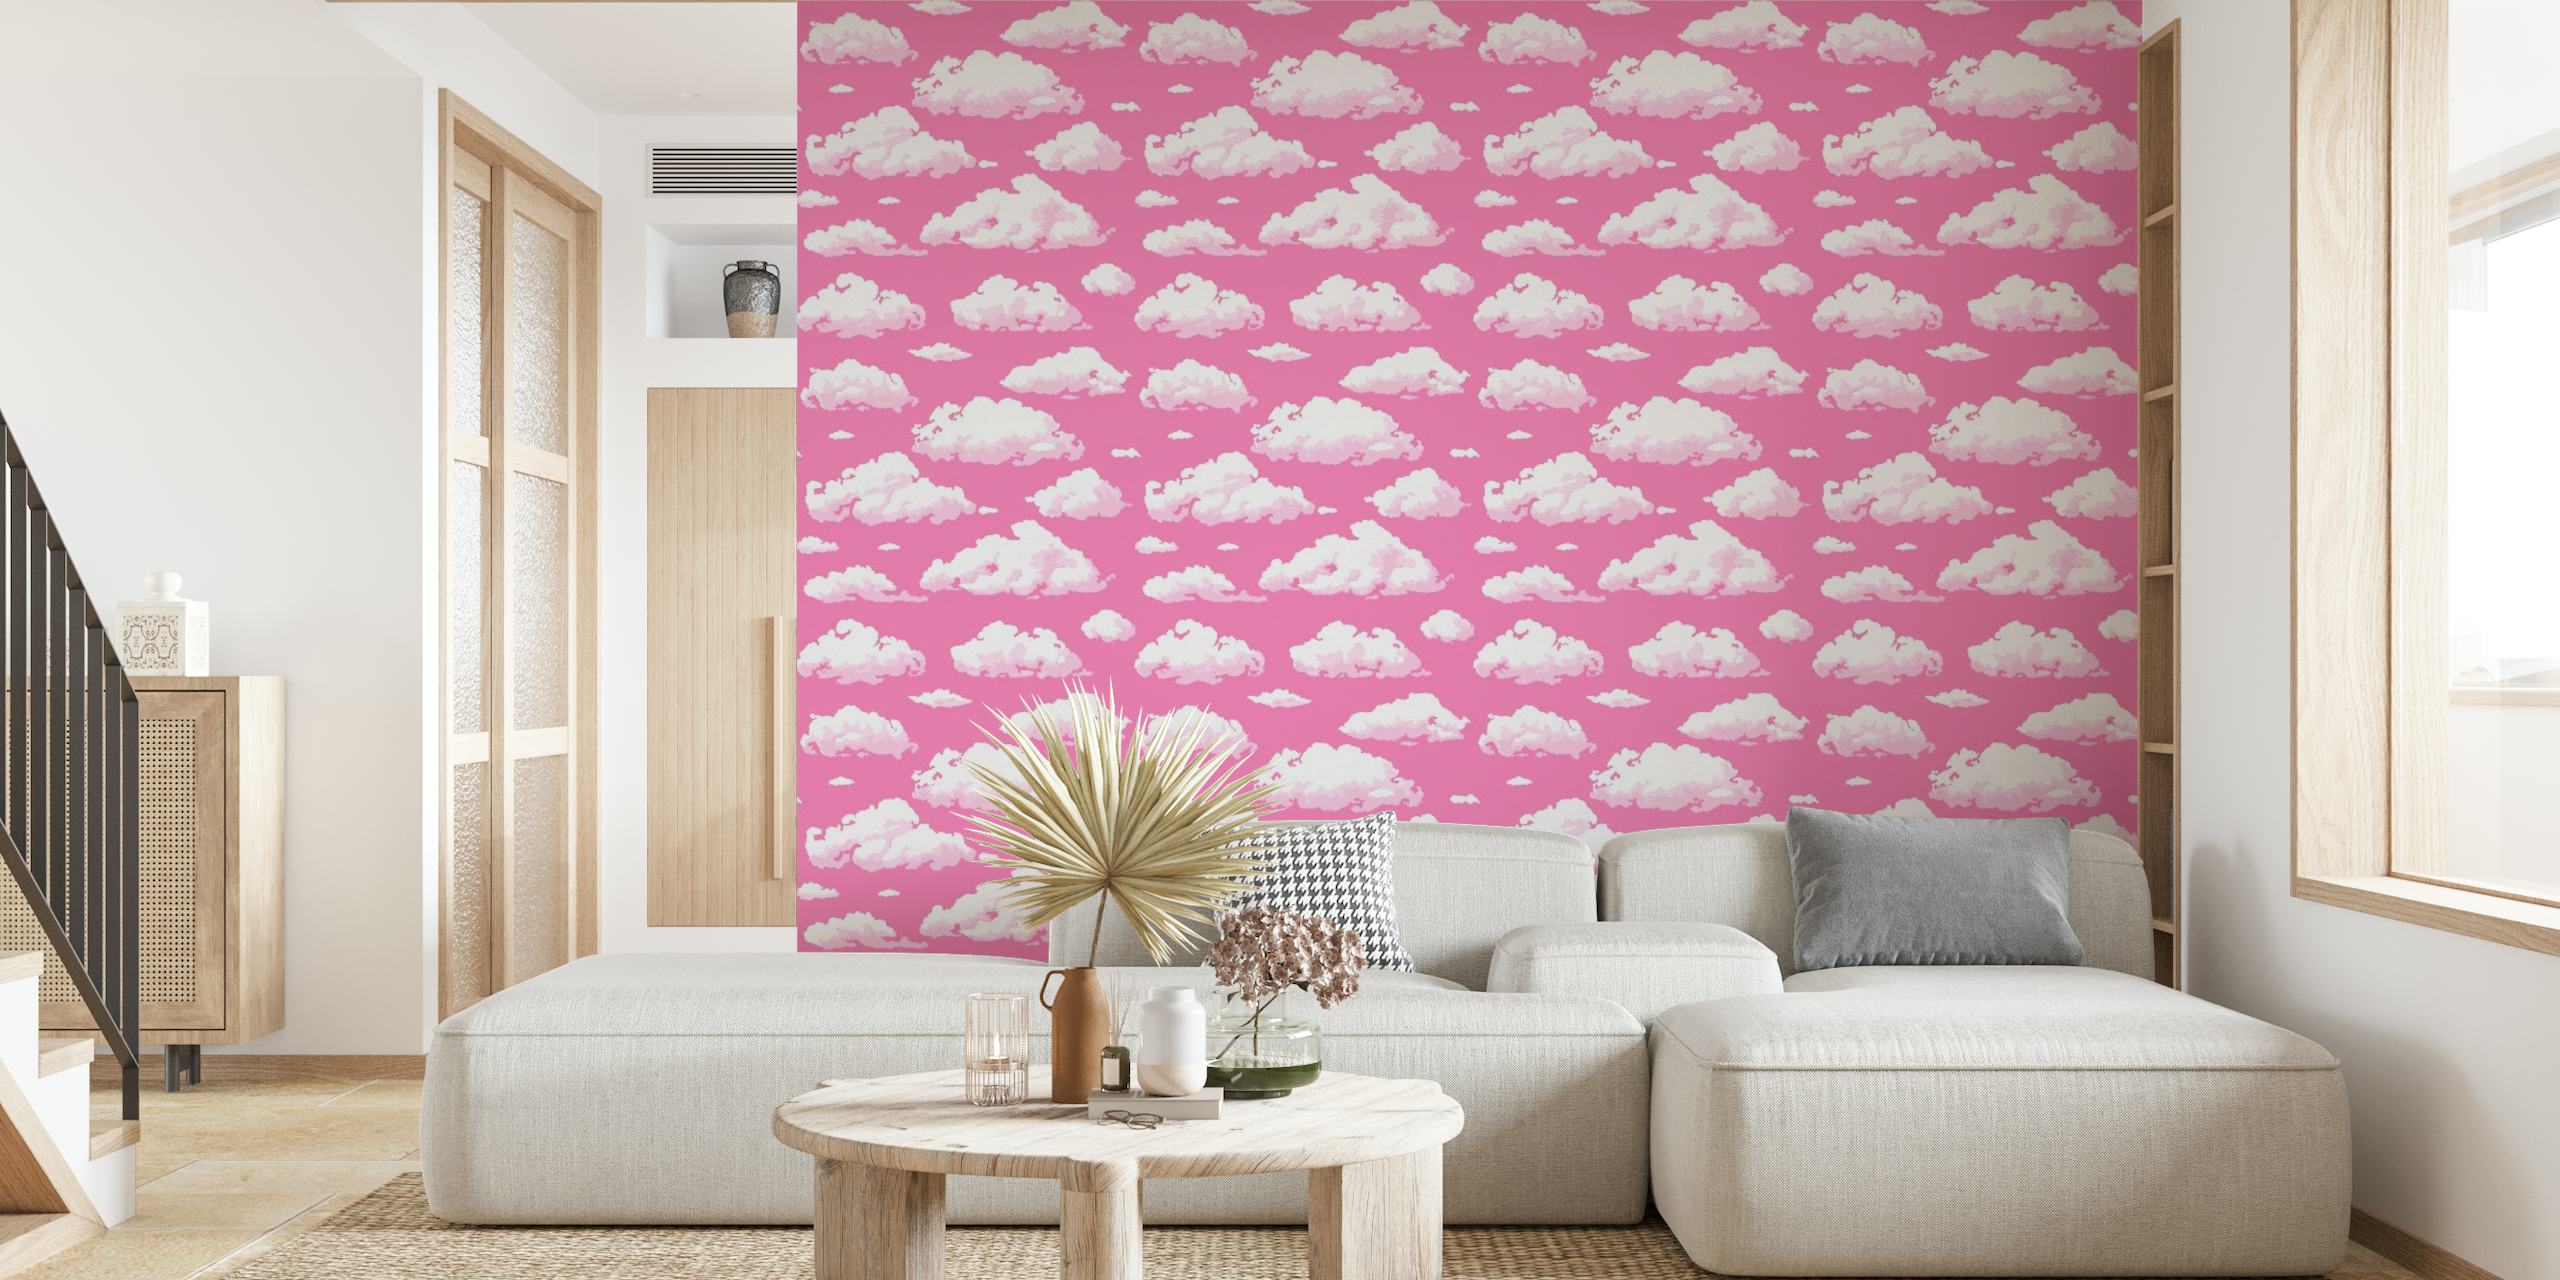 Cloudy sky on pink wallpaper